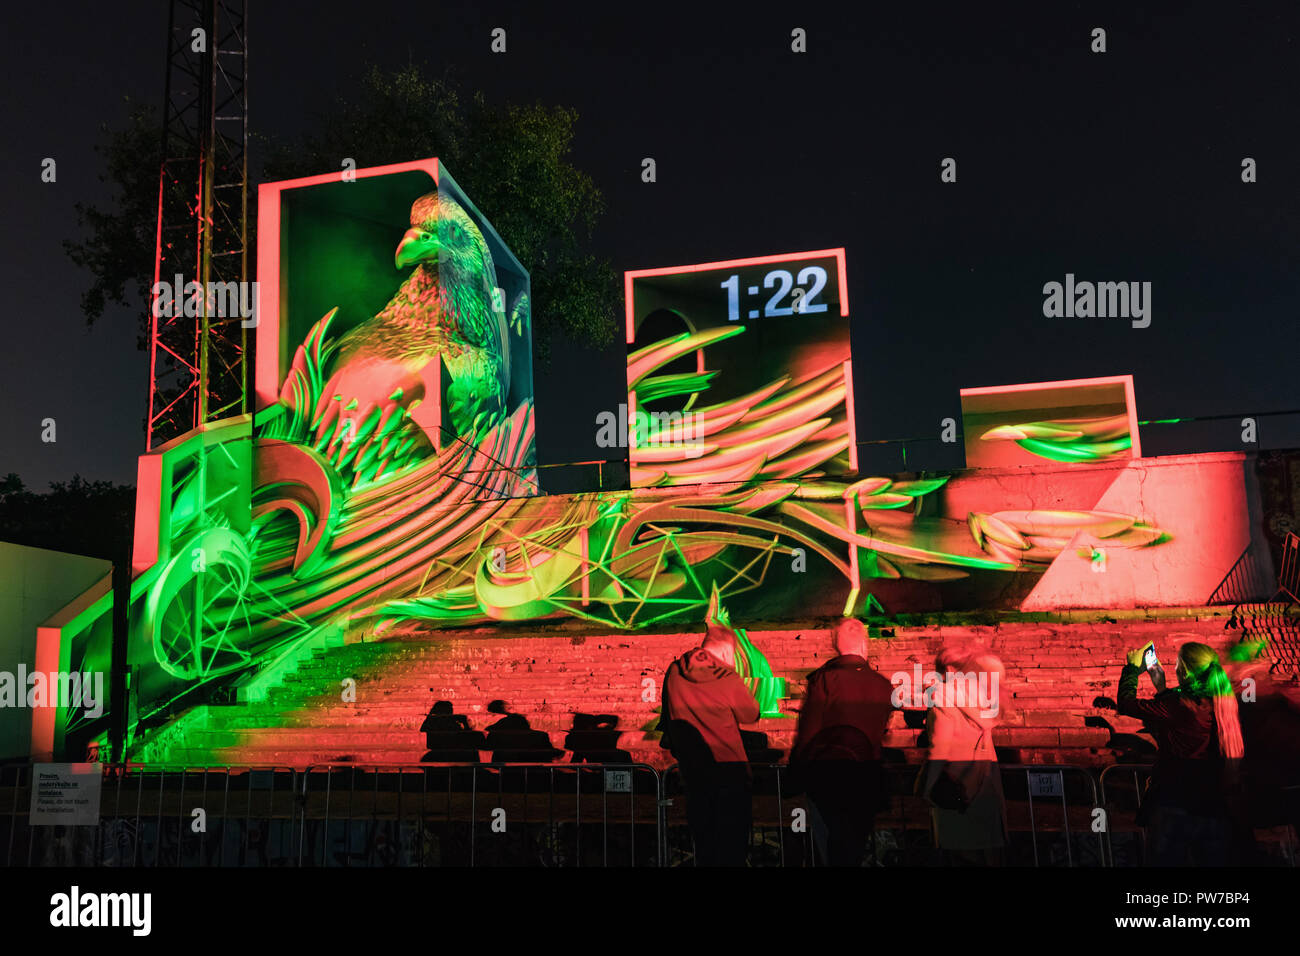 PRAGUE, CZ - OCTOBER 11, 2018: Ssssspace Illusions and Light Effects at the Prague Festival of Signal Lights 2018. Czech Republic Stock Photo